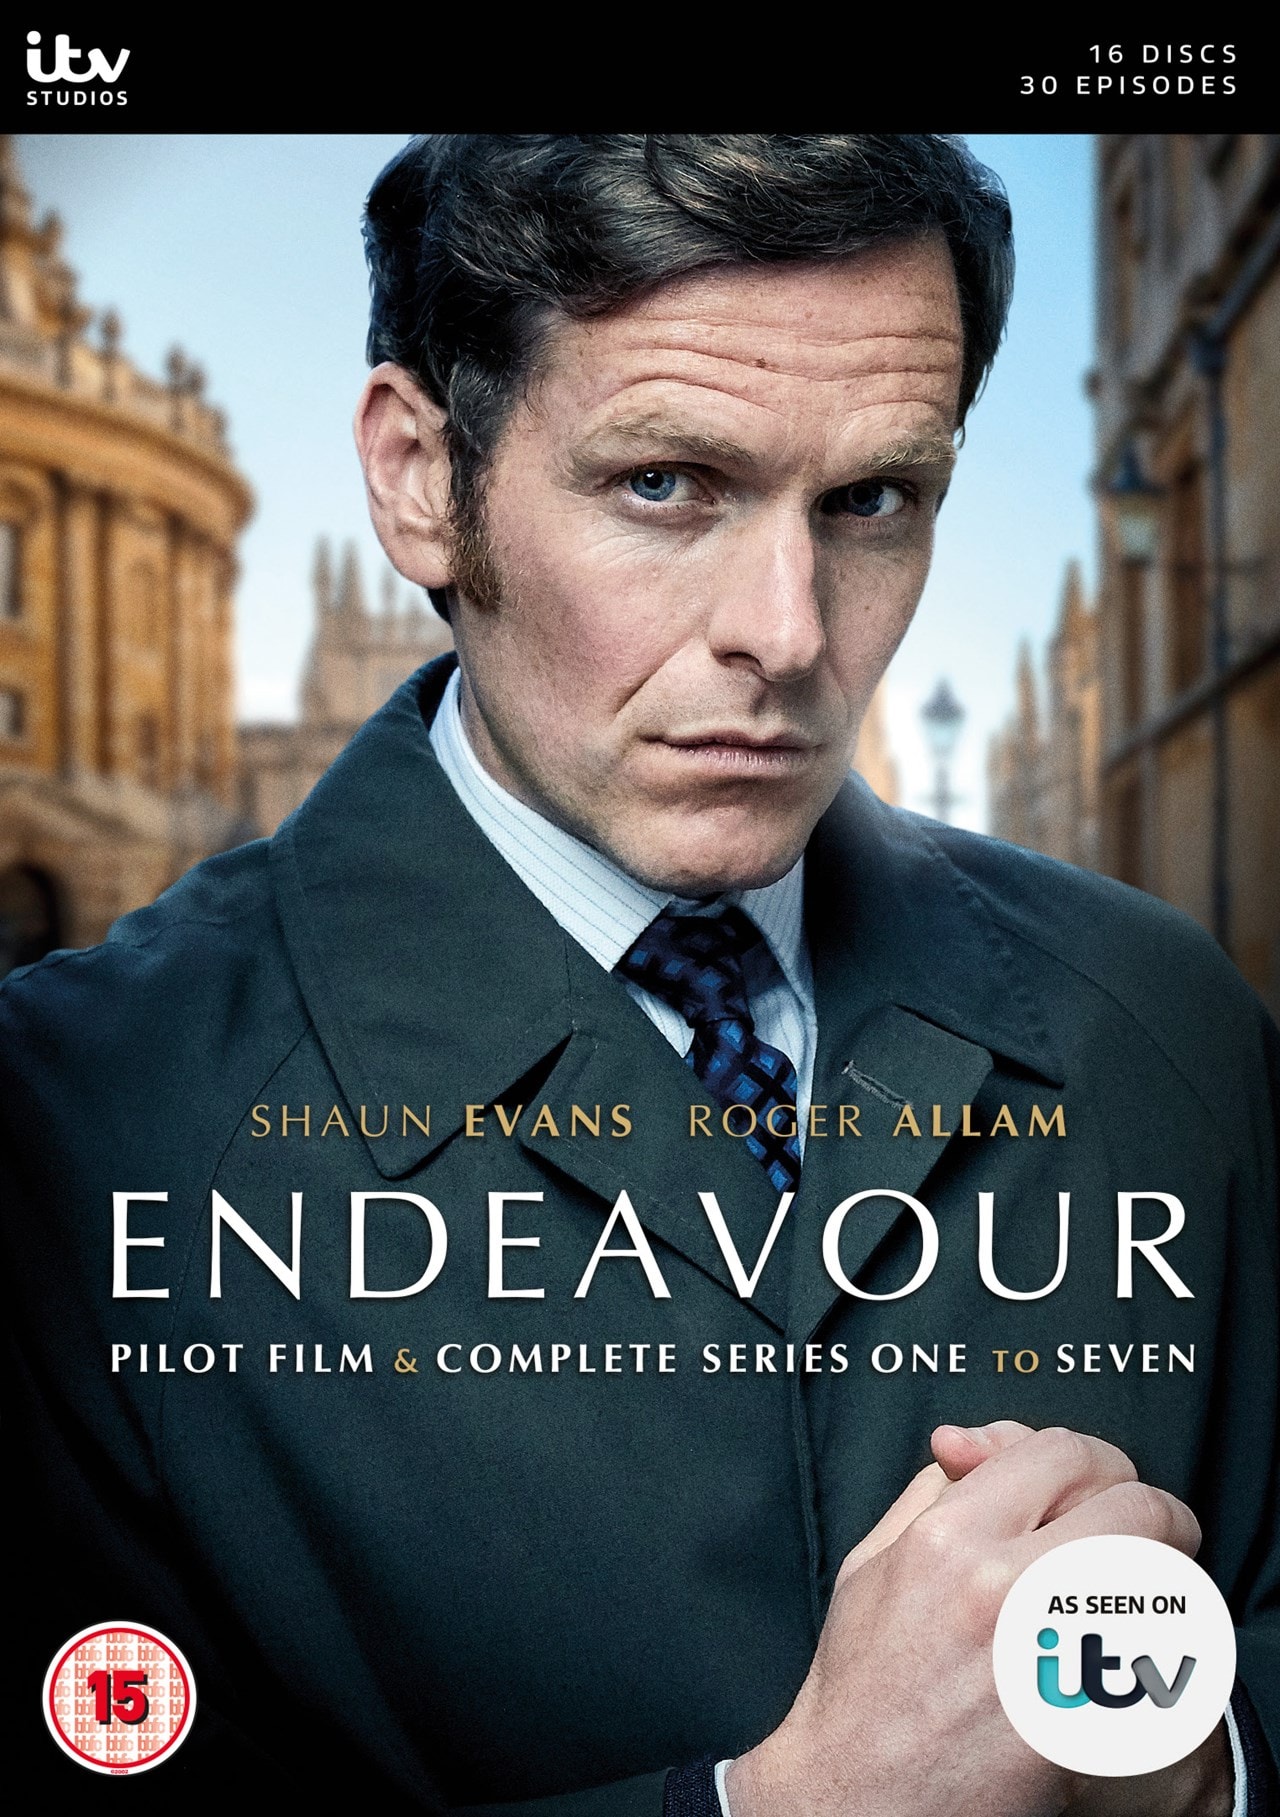 Endeavour: Complete Series One to Seven | DVD Box Set | Free shipping ...